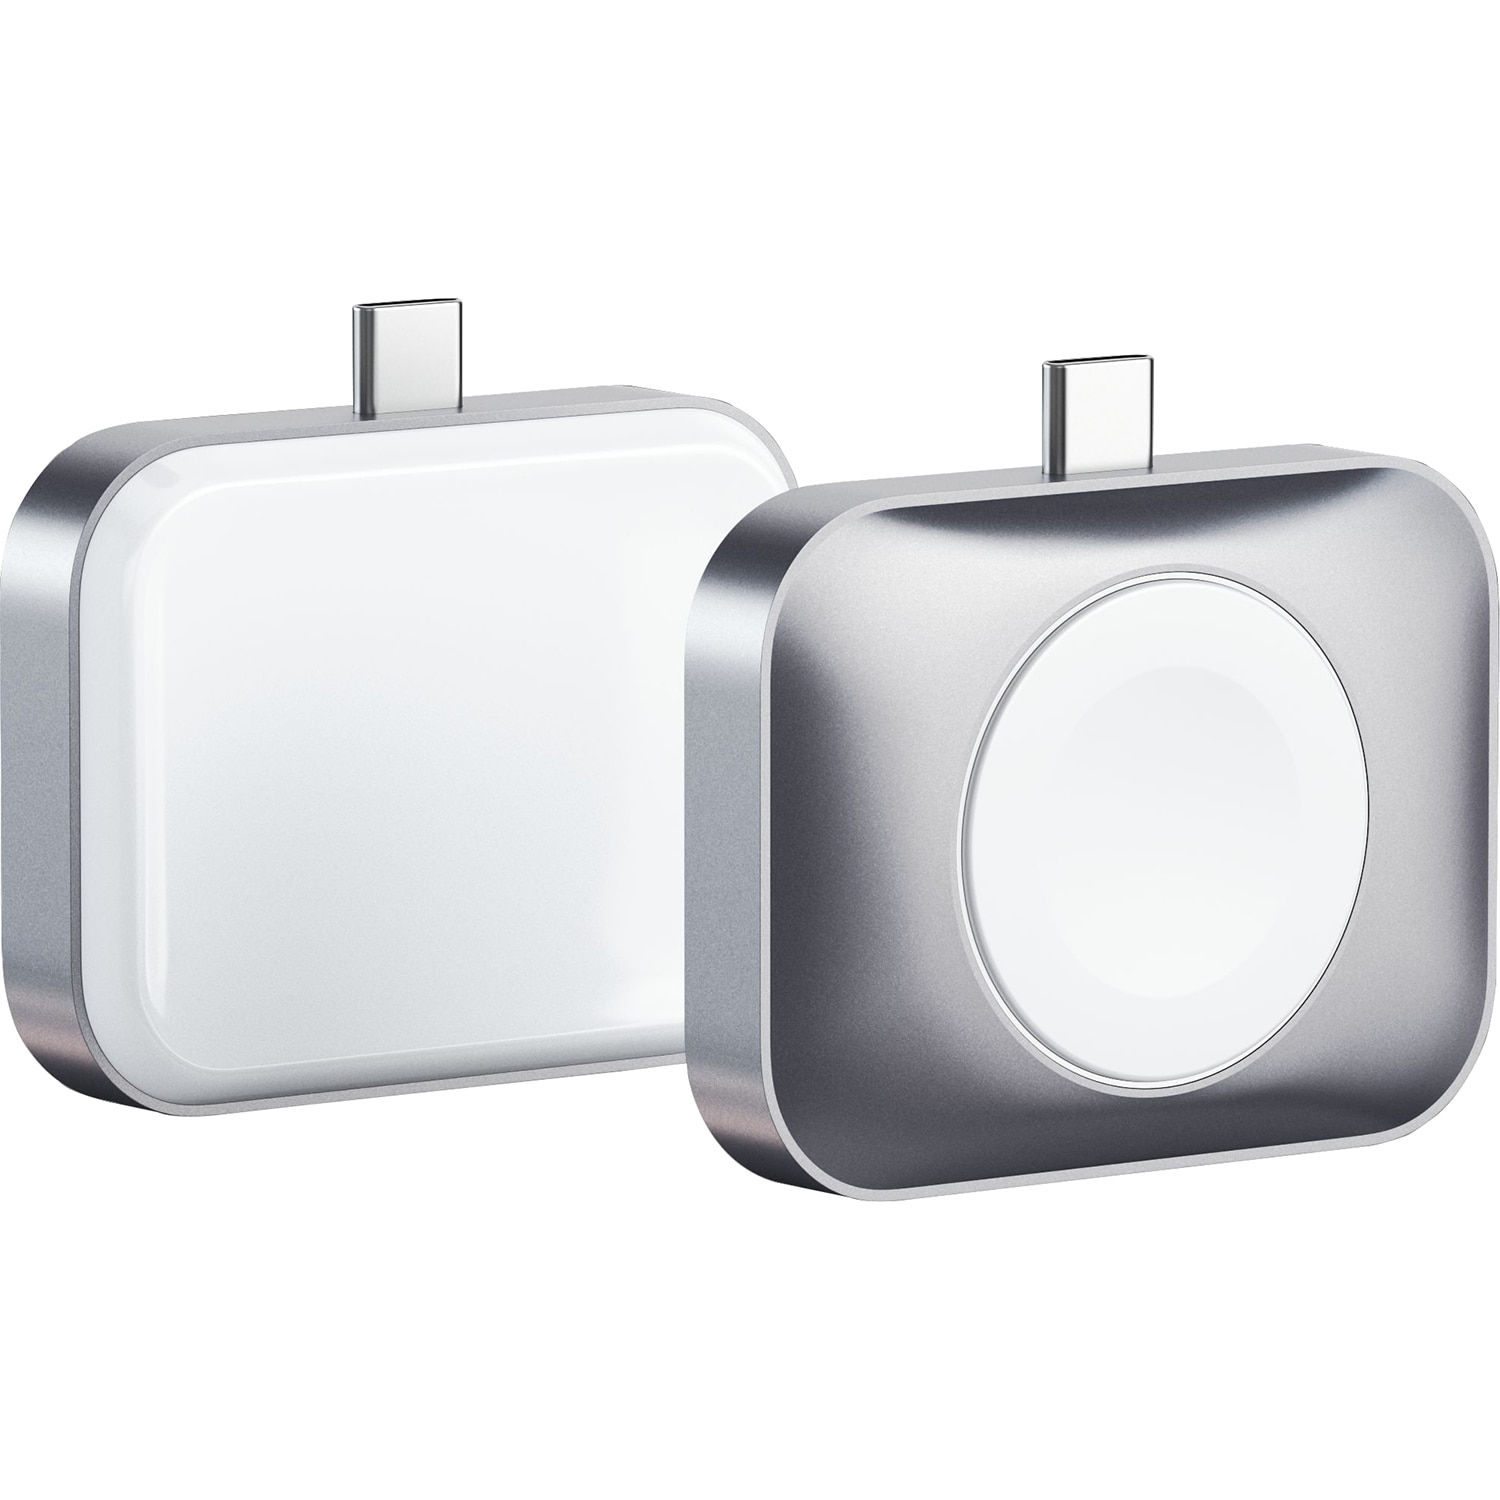 Dual sided 2-in-1 USB-C Charger for Watch/Airpods